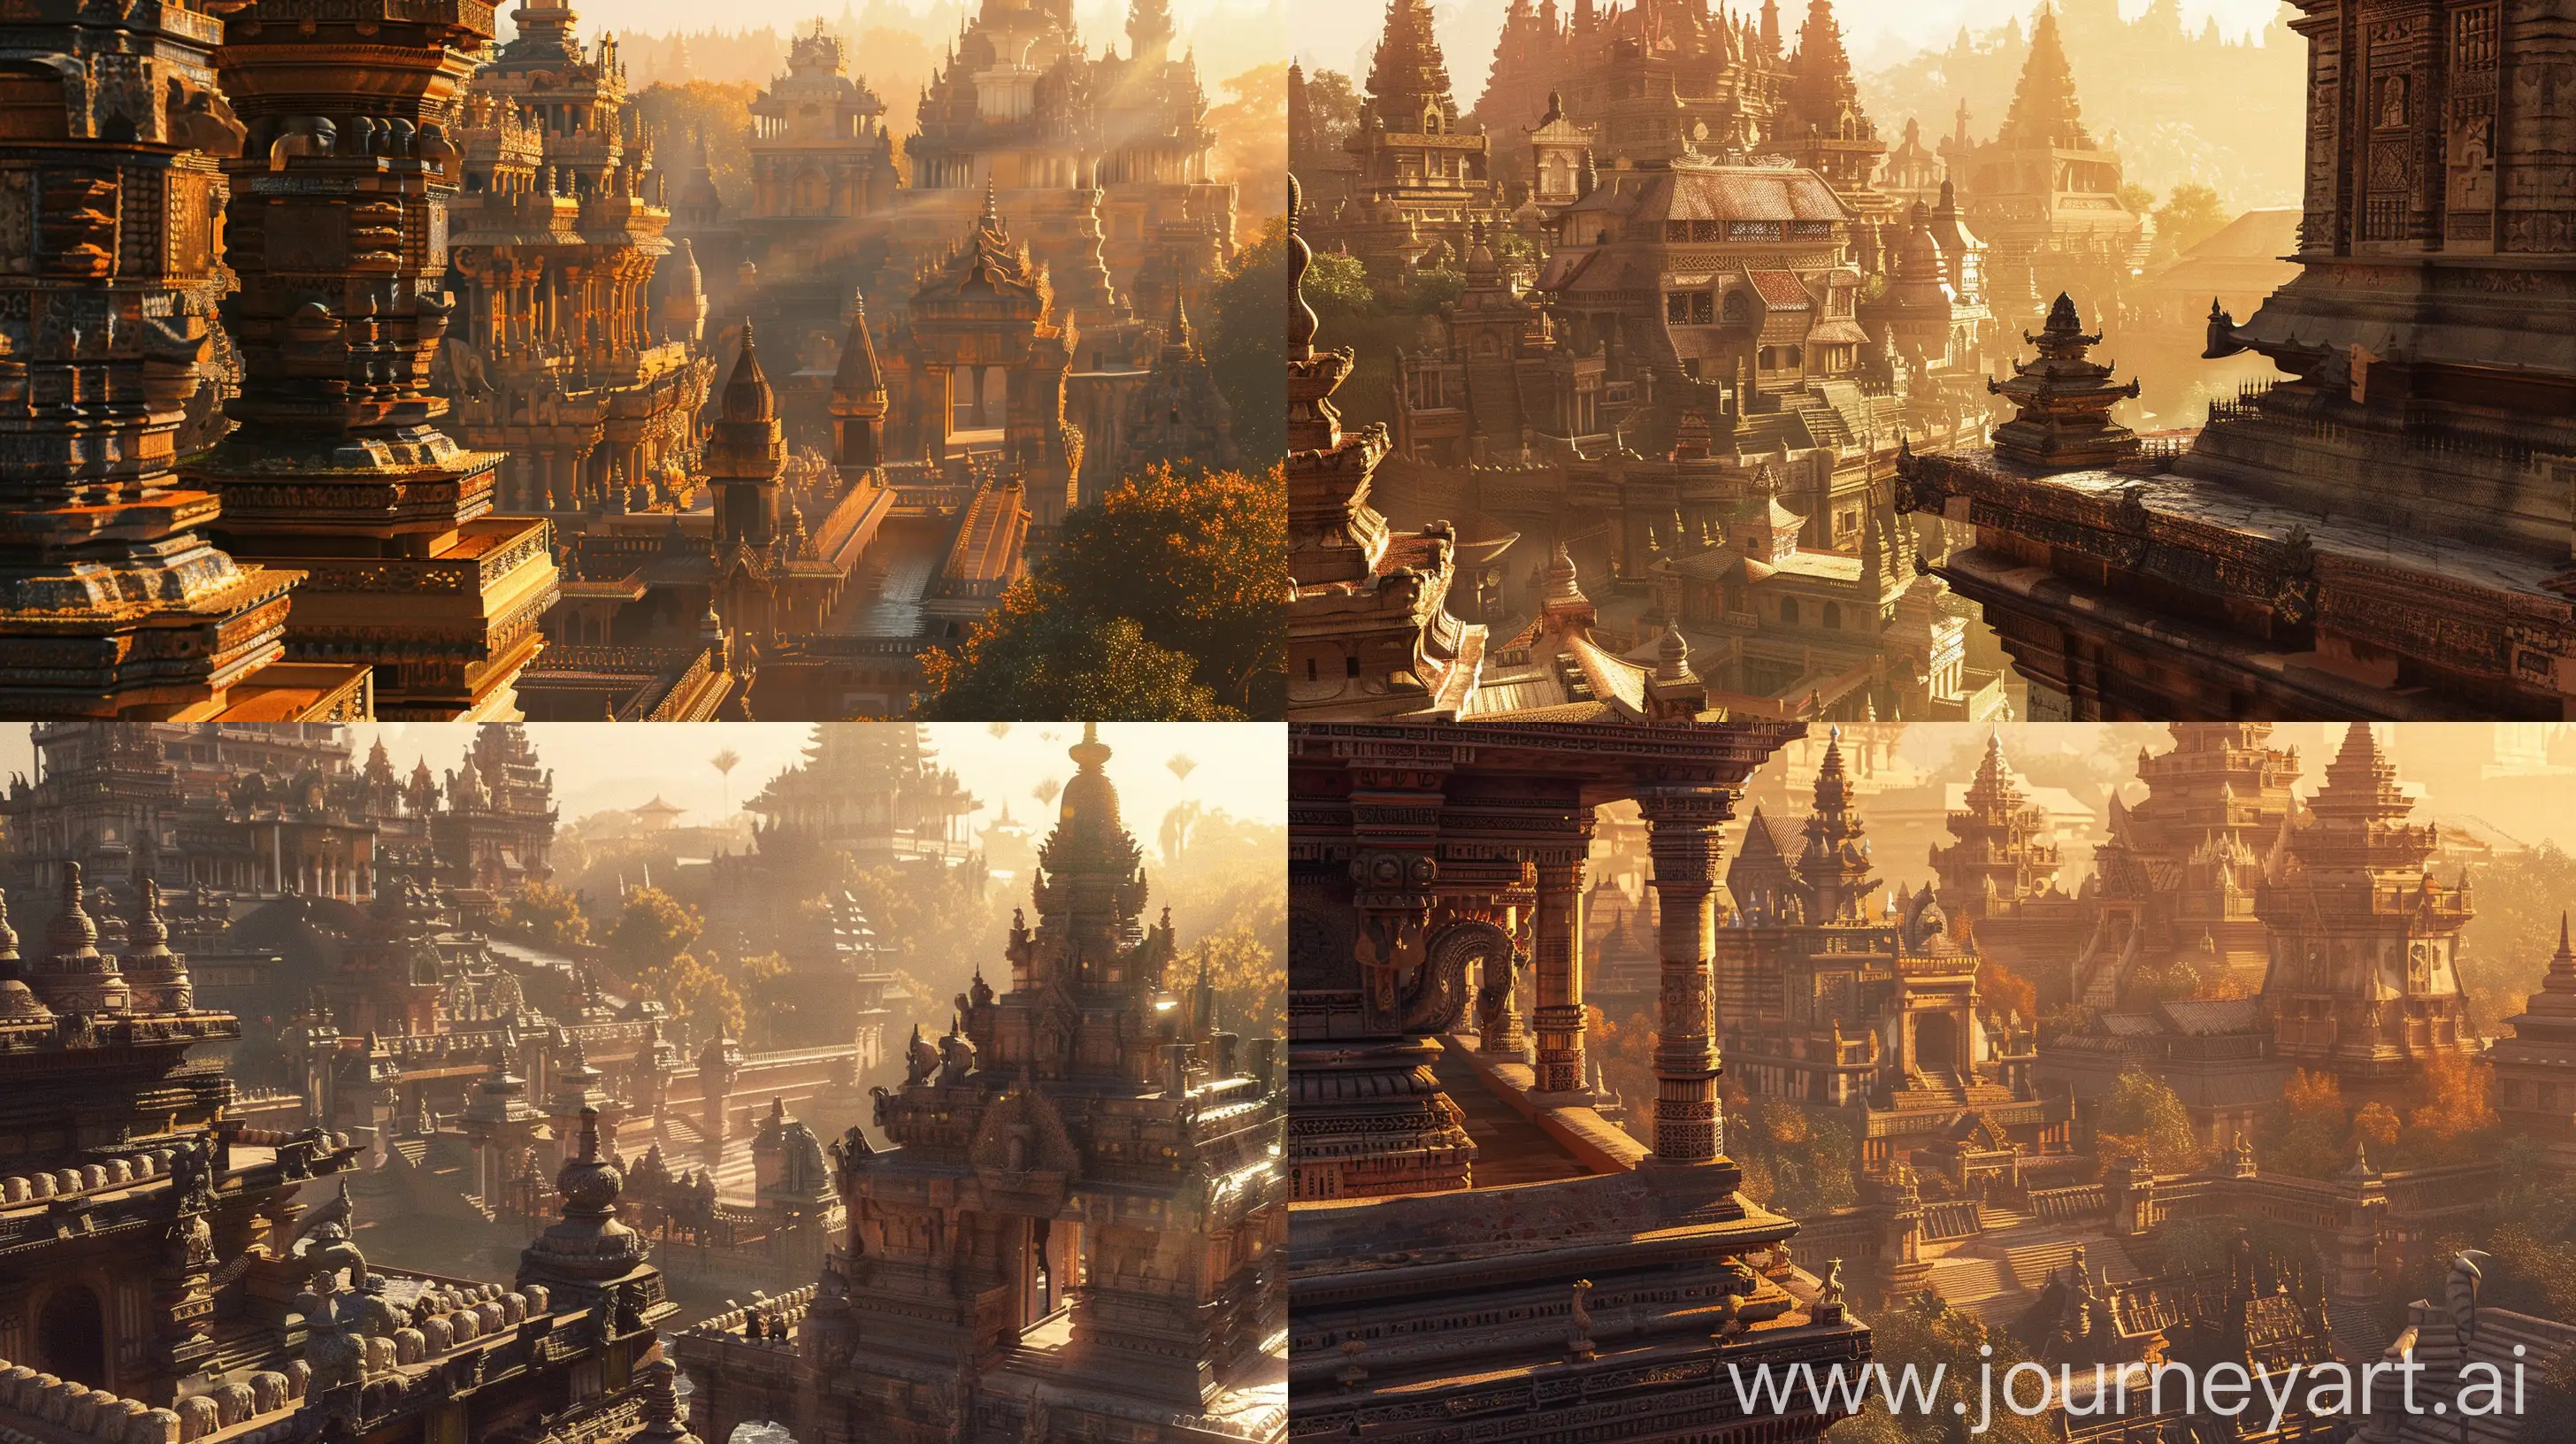 A stunning, ultra-realistic depiction of the 16th-century Sunda Kingdom, specifically the Pajajaran Sultanate. The background showcases grandiose palaces and towering temples, adorned with intricate carvings and elaborate decorations. The architecture is a breathtaking blend of traditional and contemporary styles, highlighting the rich cultural heritage of the region. The scene is bathed in warm, golden sunlight, casting long shadows and emphasizing the detailed craftsmanship of the structures. super realistic, nice detail, --v 6 --ar 16:9